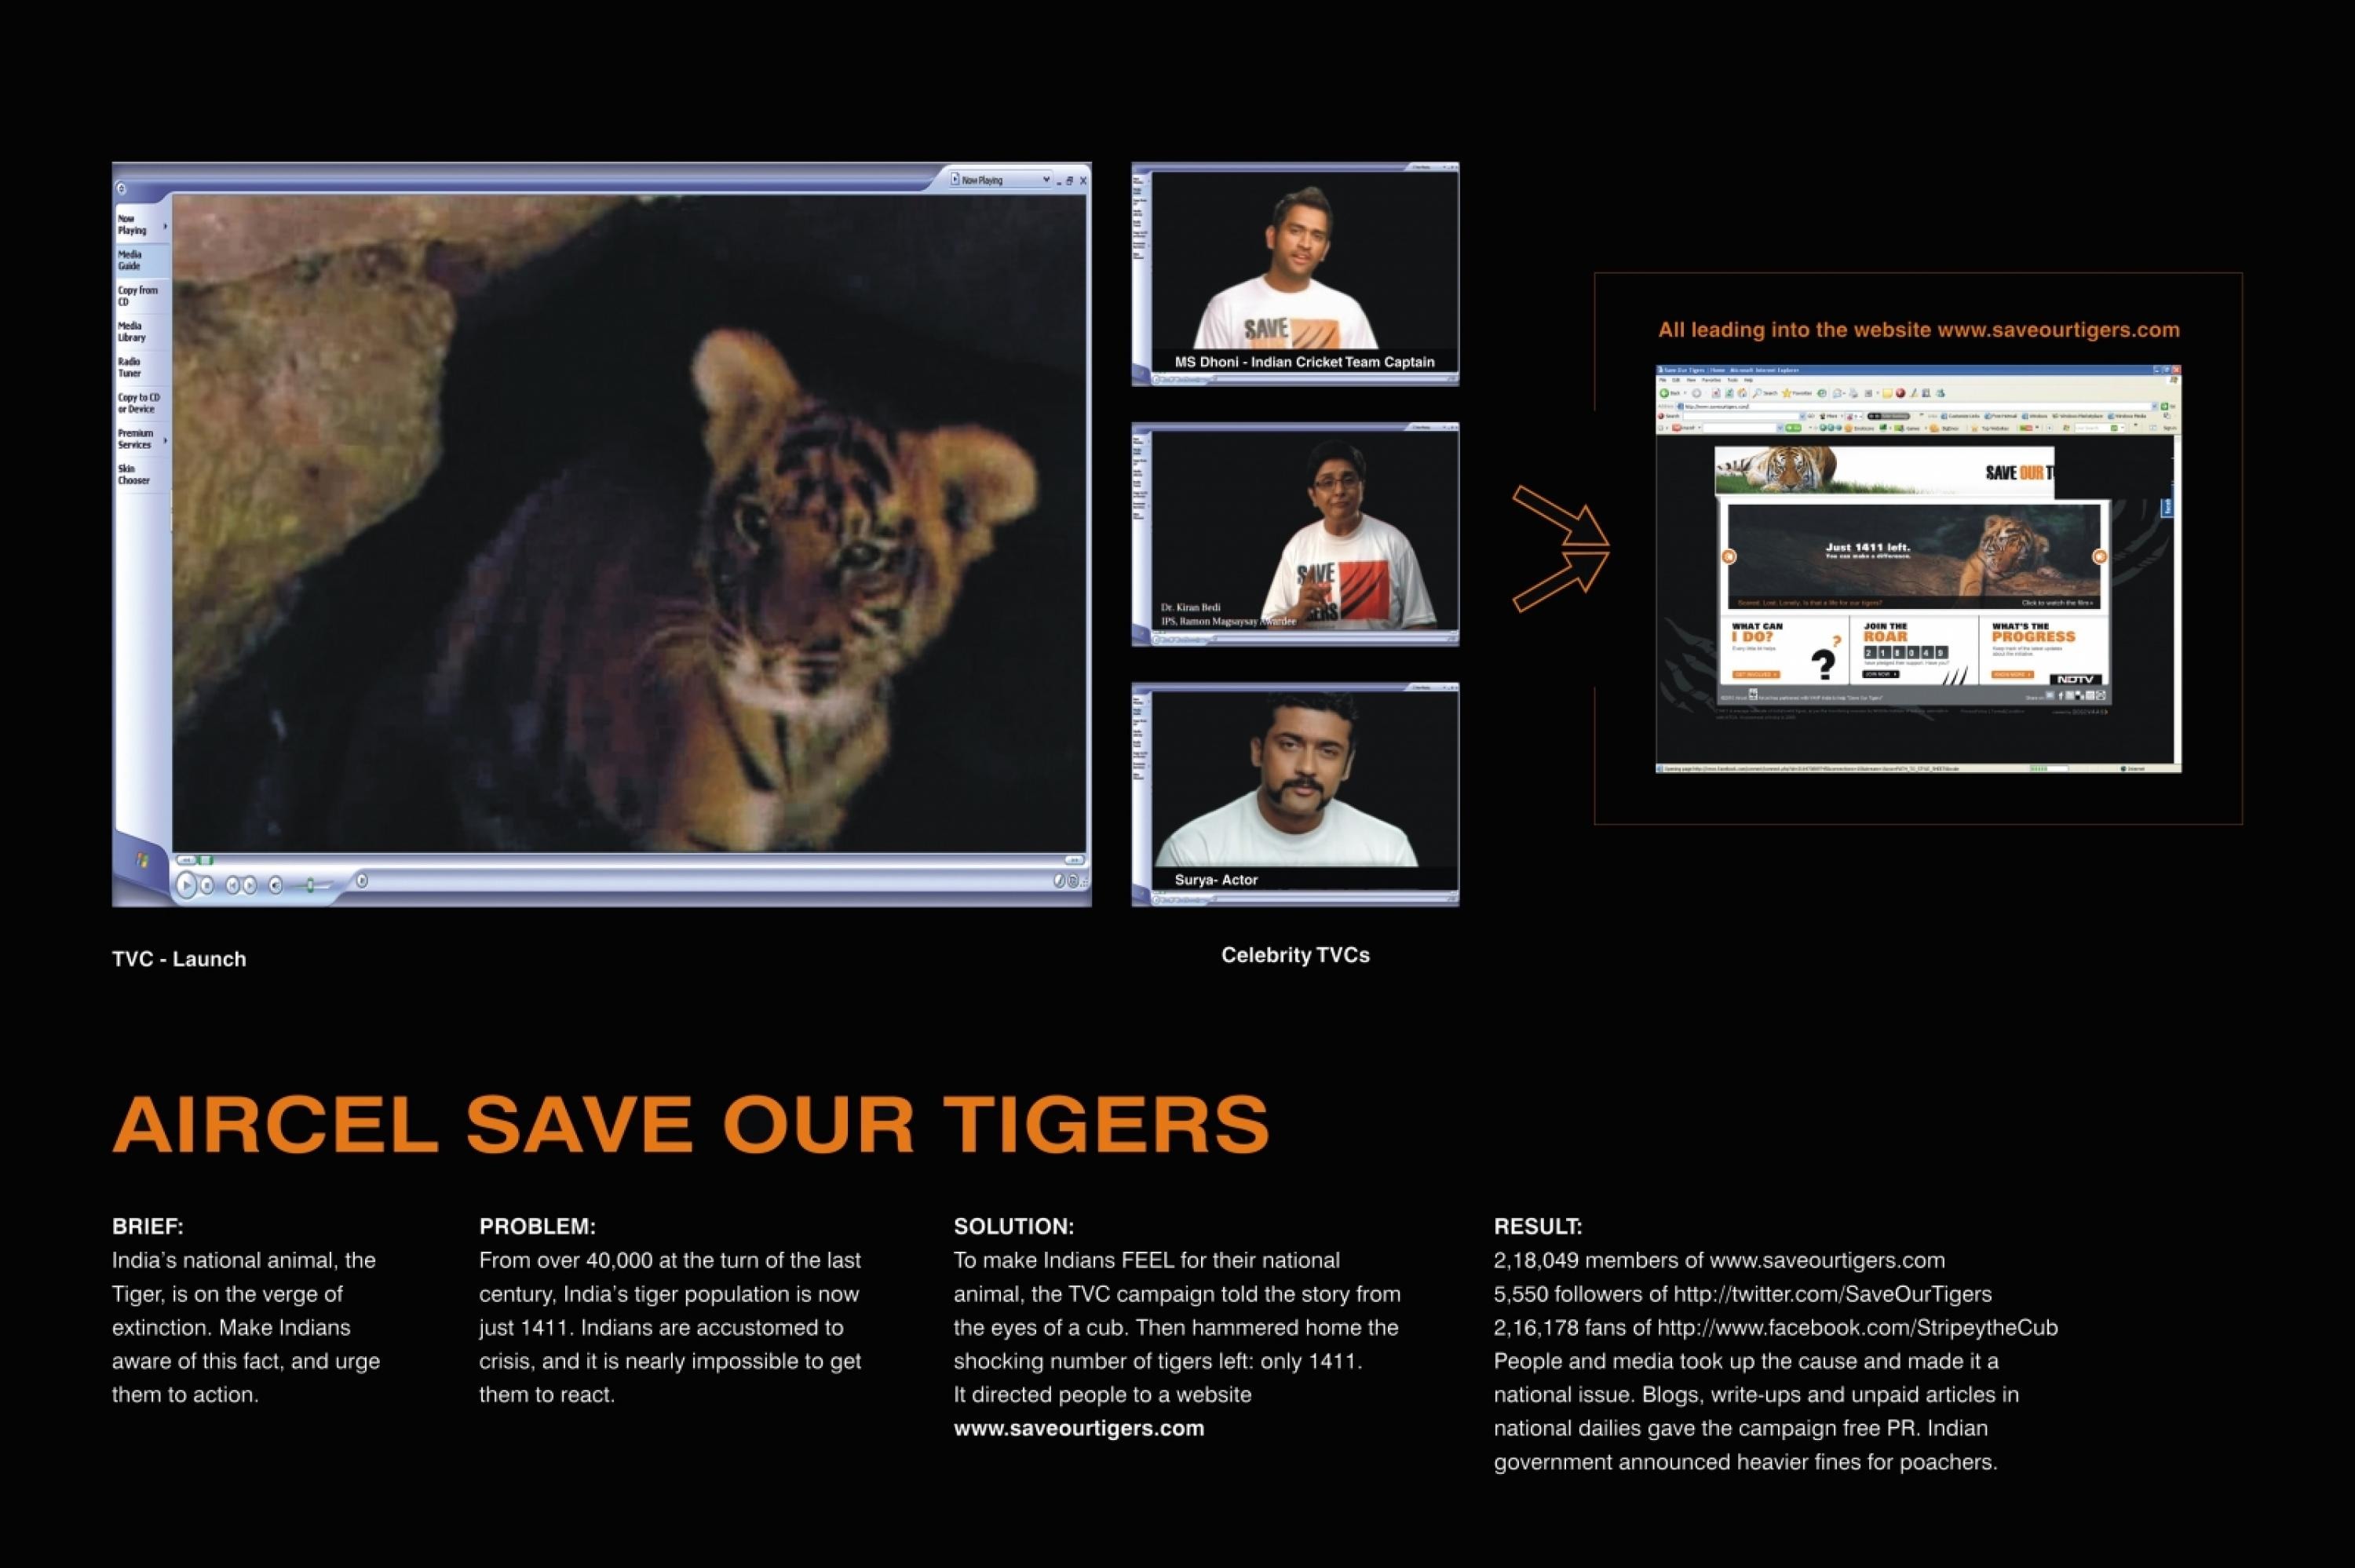 SAVE OUR TIGERS CAMPAIGN